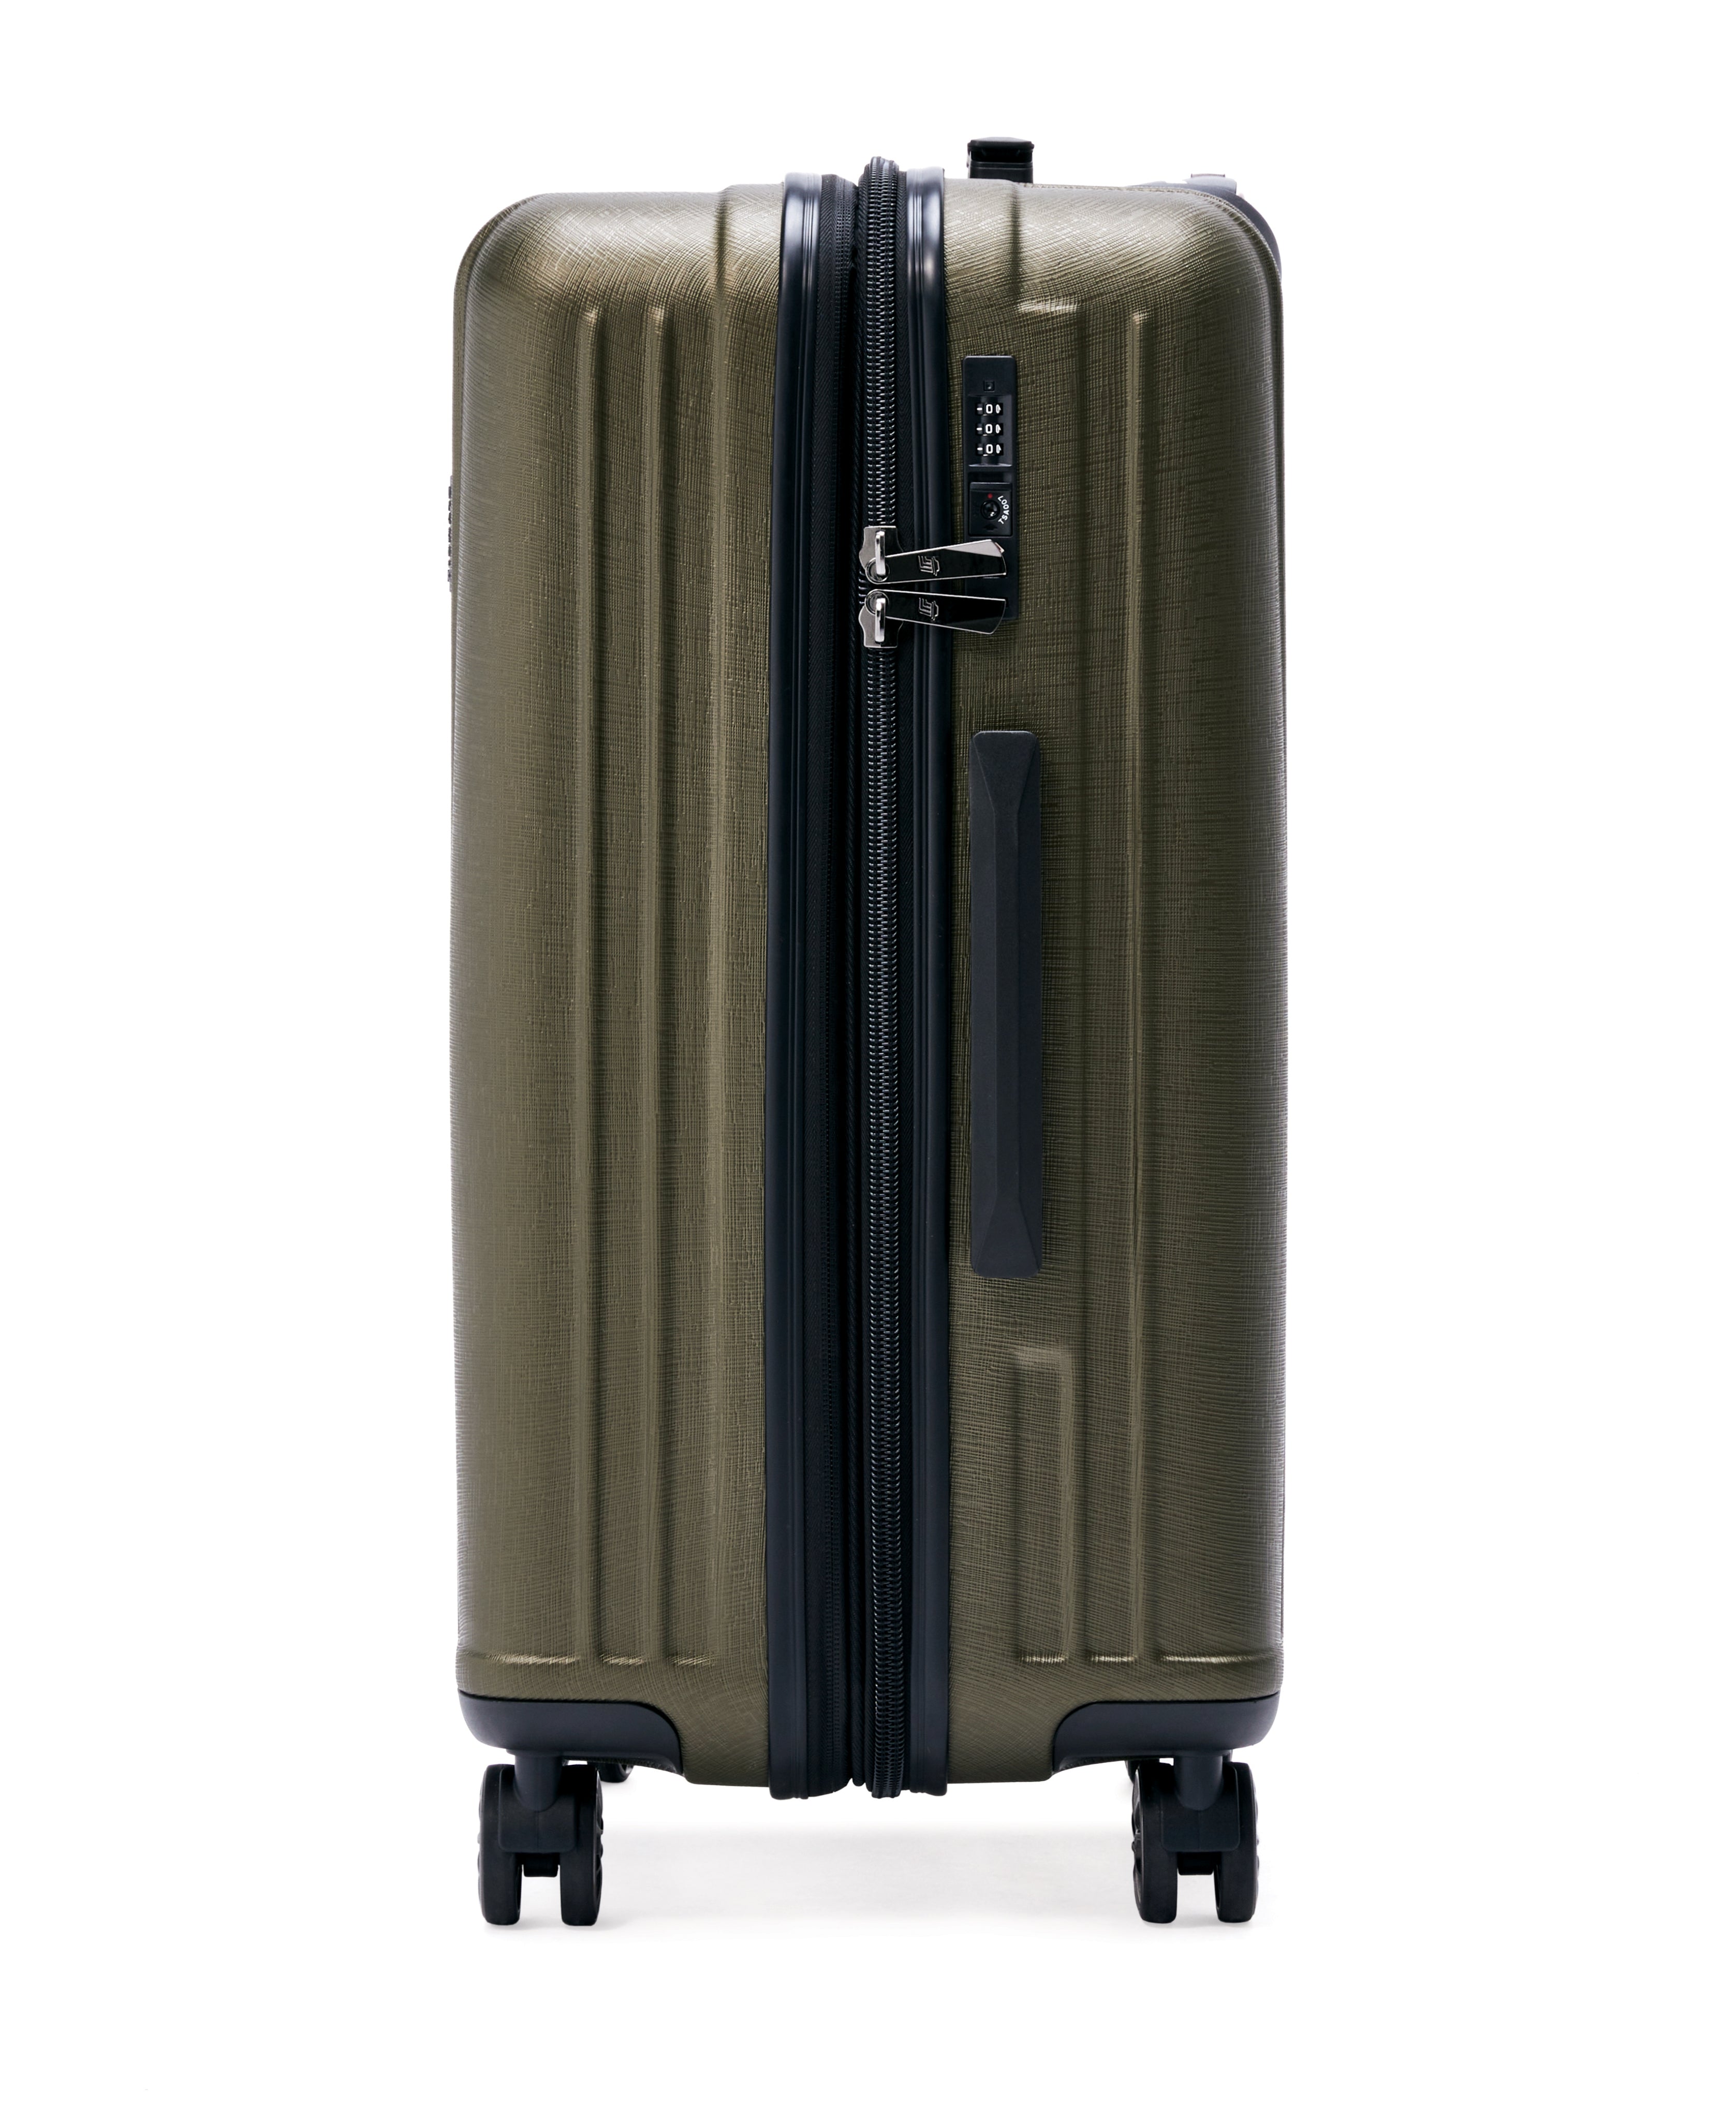 Sidewinder 21" Expandable Carry-On Spinner Polycarbonate Luggage with TSA Lock System